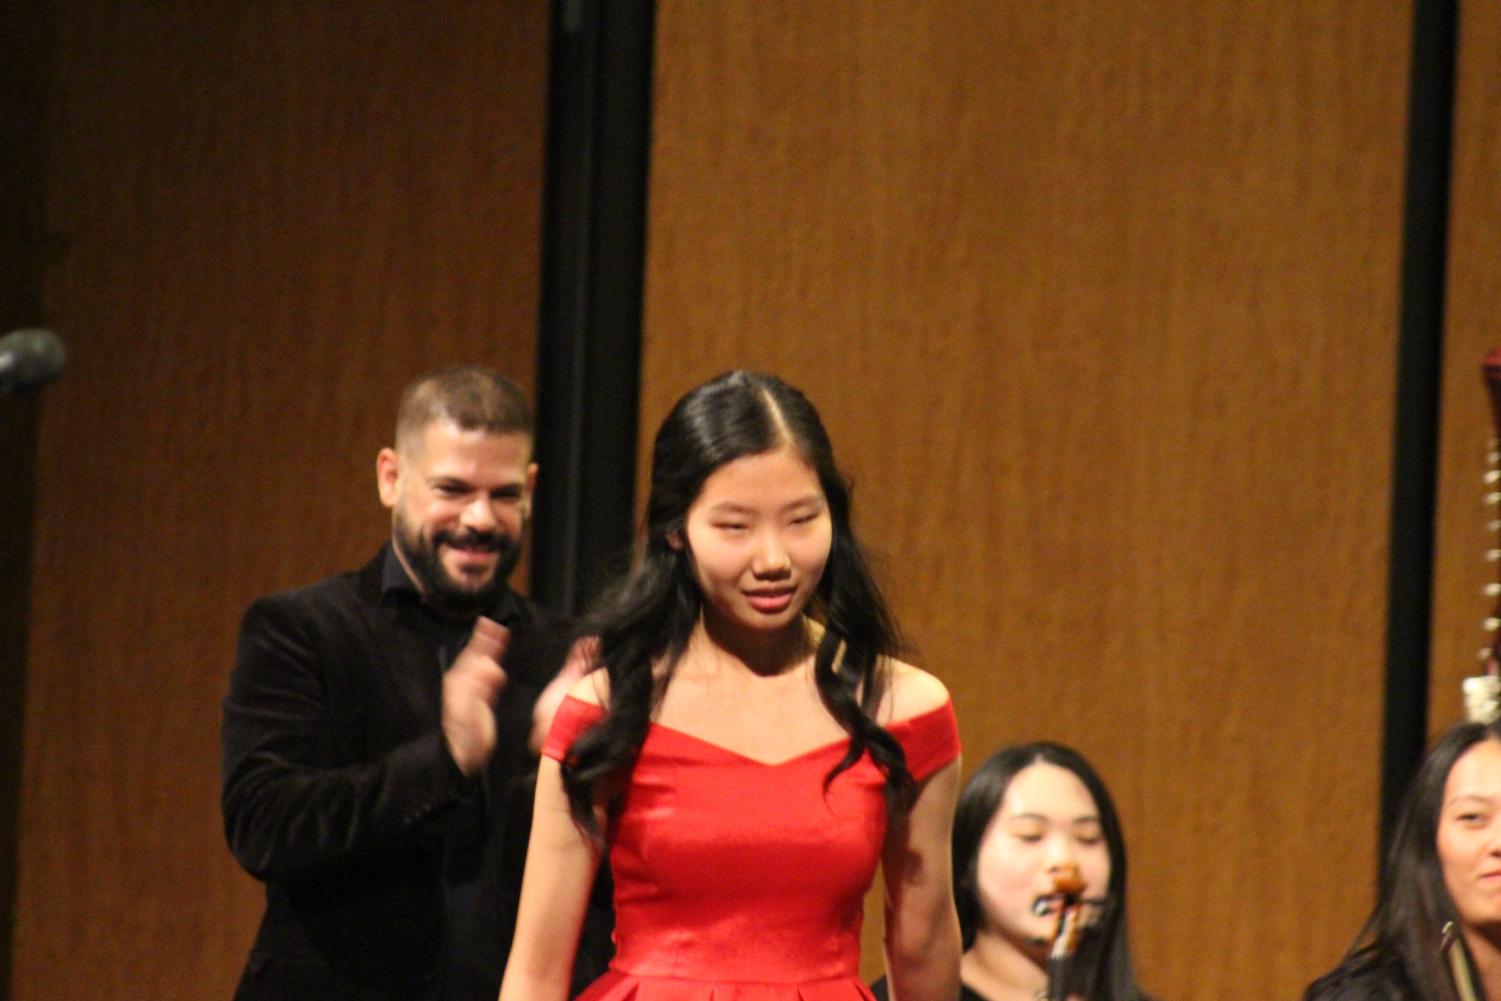 Senior Soloist Stephanie Li '19 walks up to the piano before her solo as Enrique Vilaseco cheers her on. Li went on to perform Ravel's Piano Concerto in G Major, Movement No. 1.